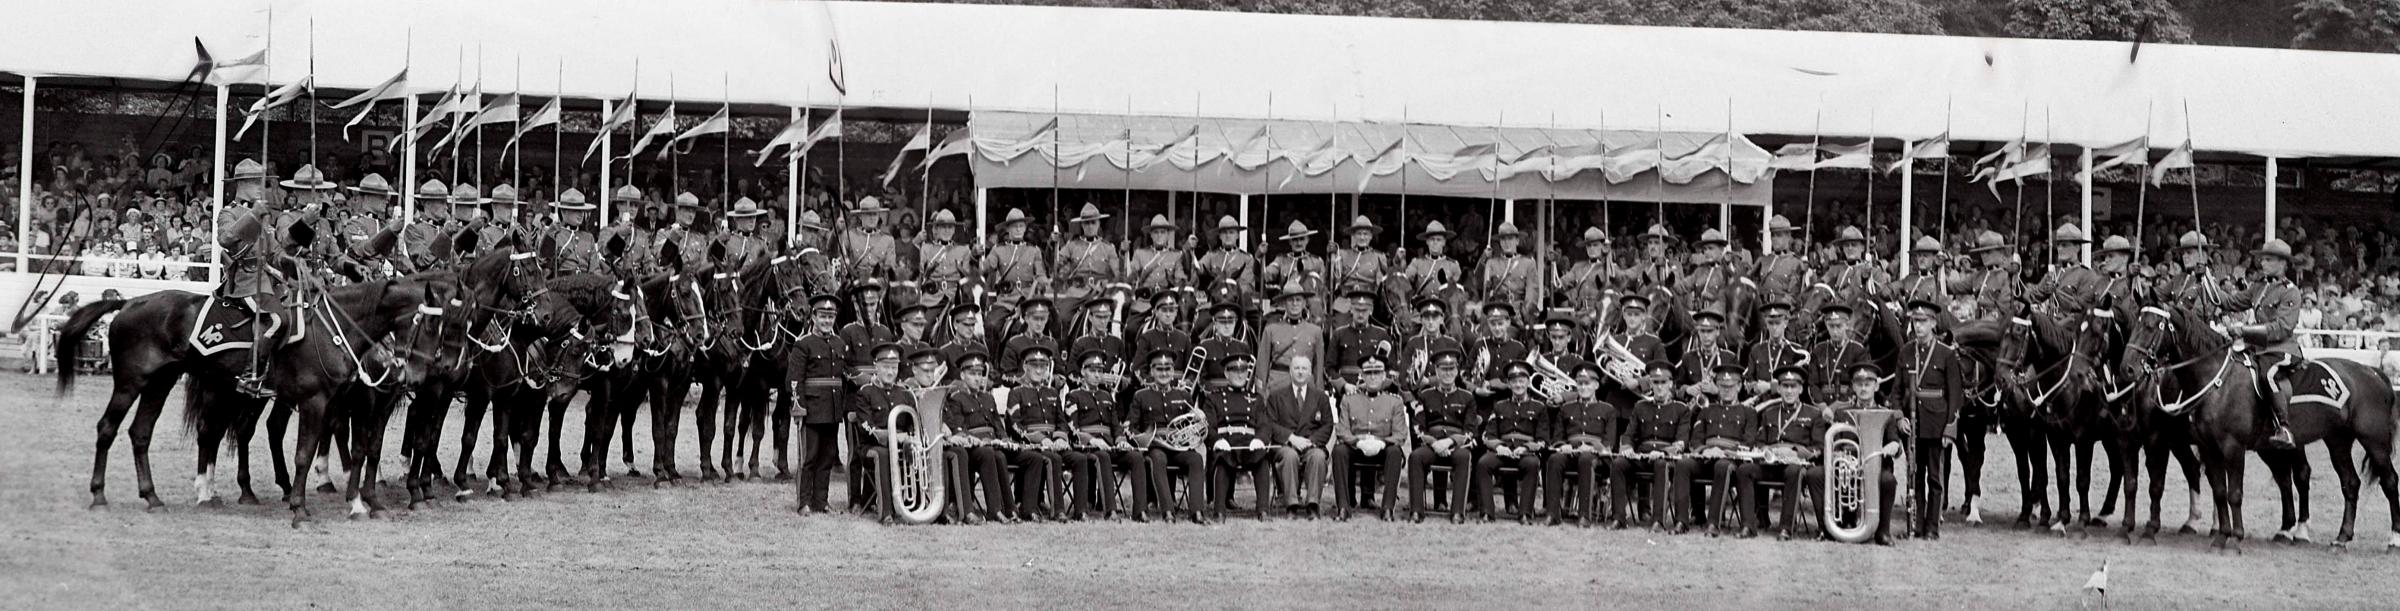 The Canadian Mounted Police were the star attraction at the 1953 Highland Show in Alloa Picture ref: 1361